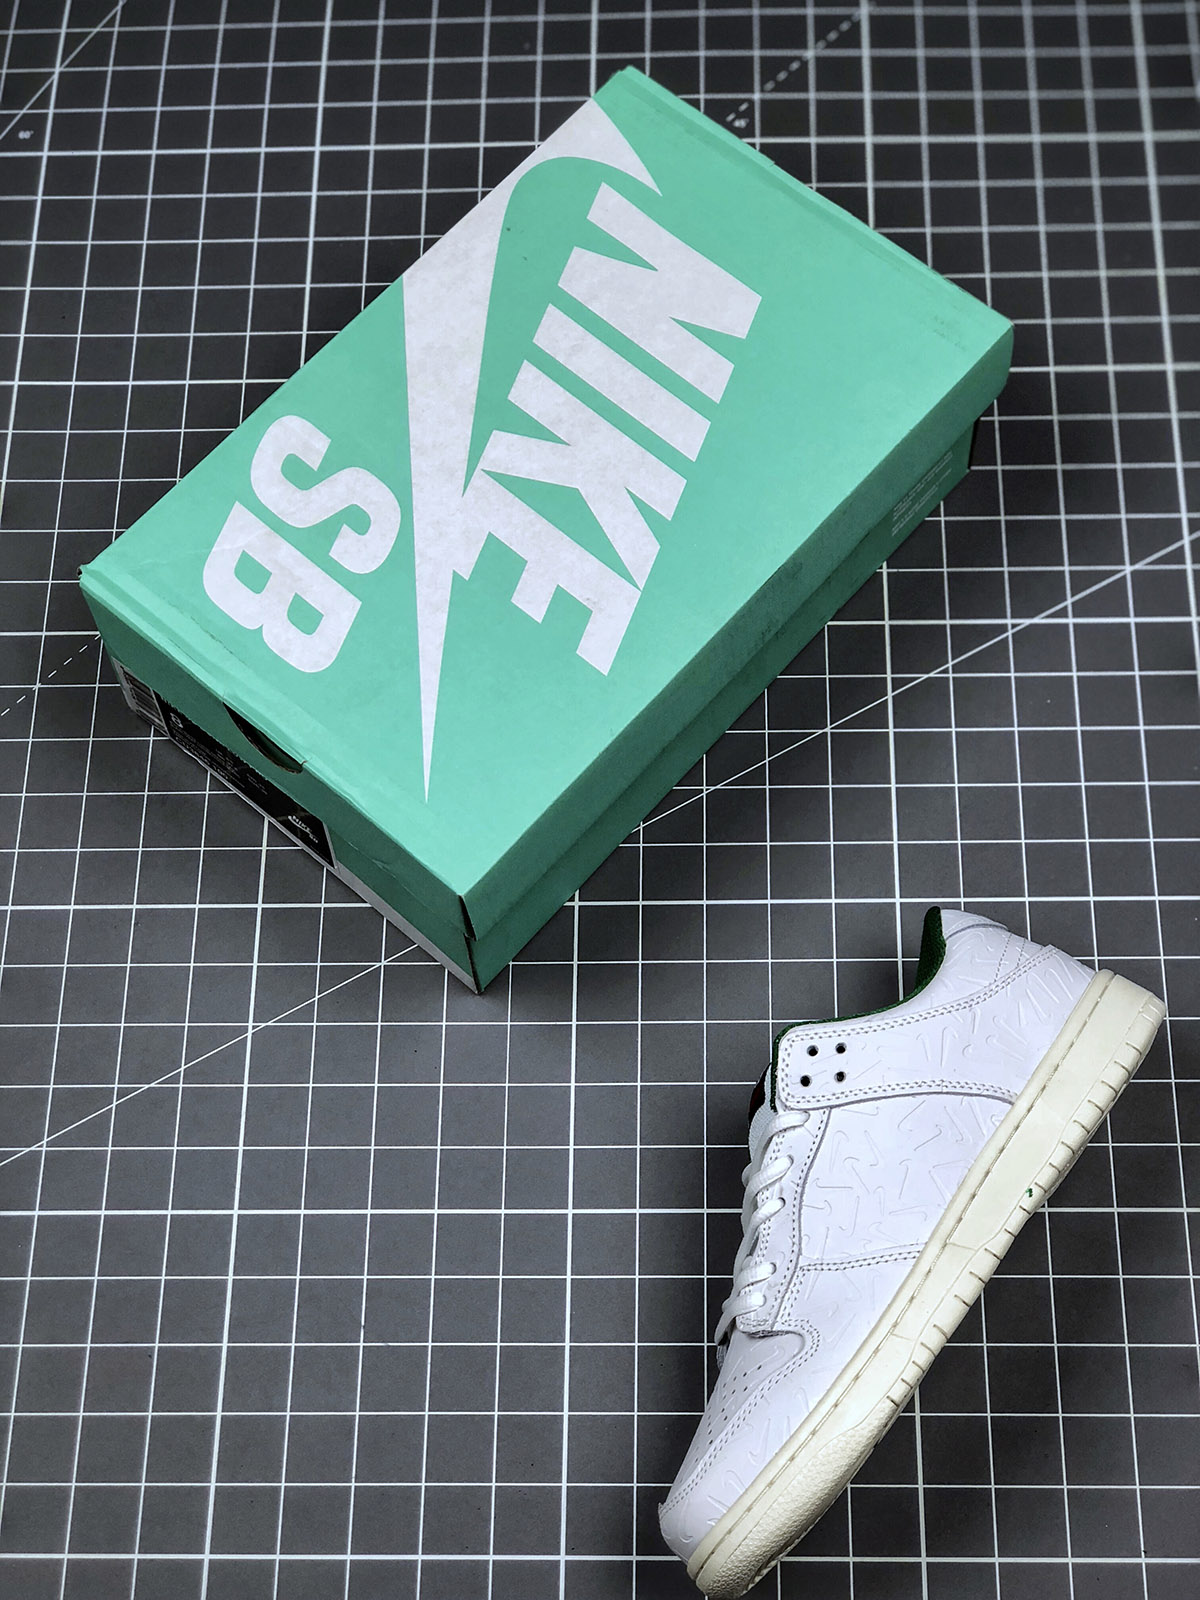 Ben-G x Nike SB Dunk Low White Lucid Green CU3846-100 For Sale ...